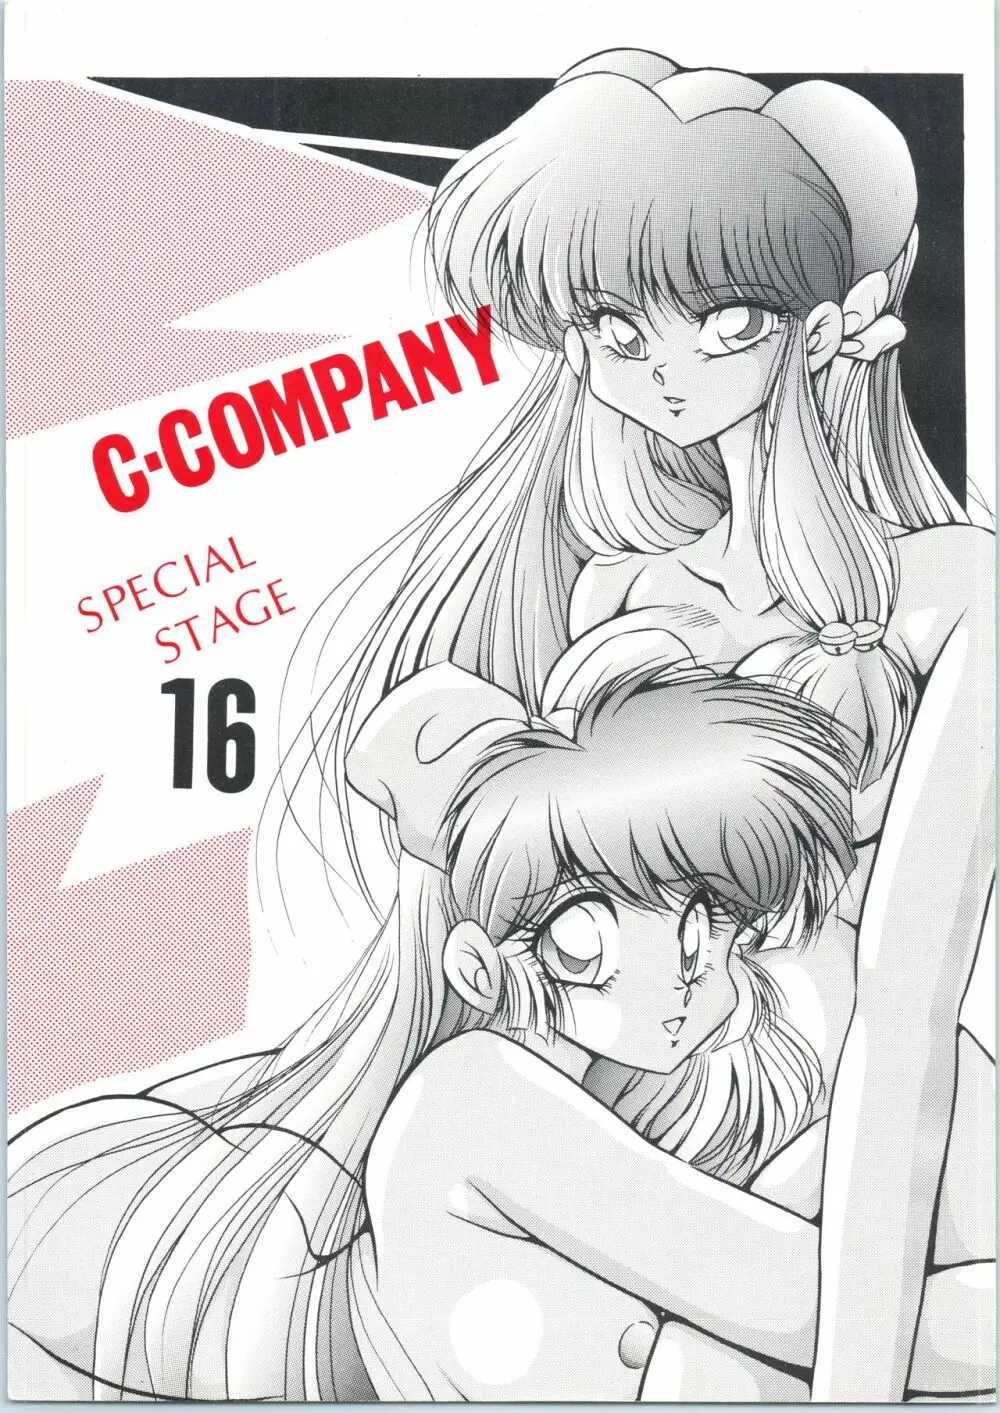 C-COMPANY SPECIAL STAGE 16 - page1